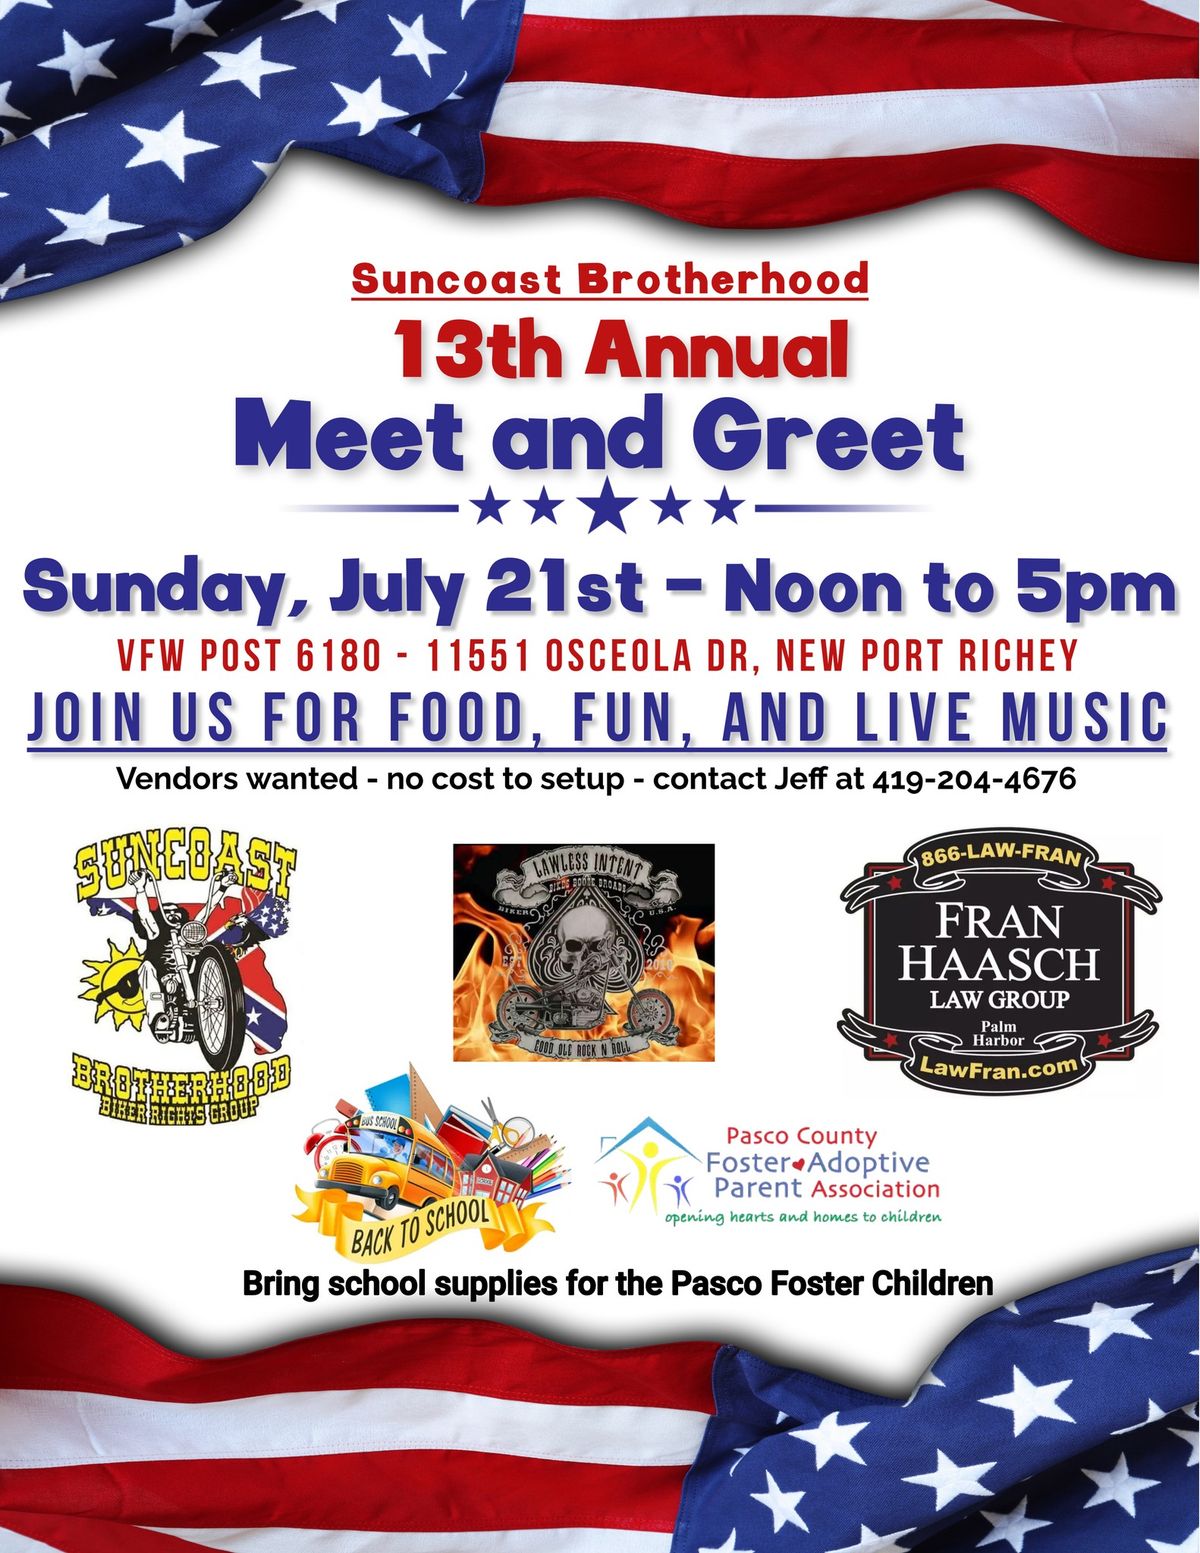 SCBH 13th Annual Meet and Greet event